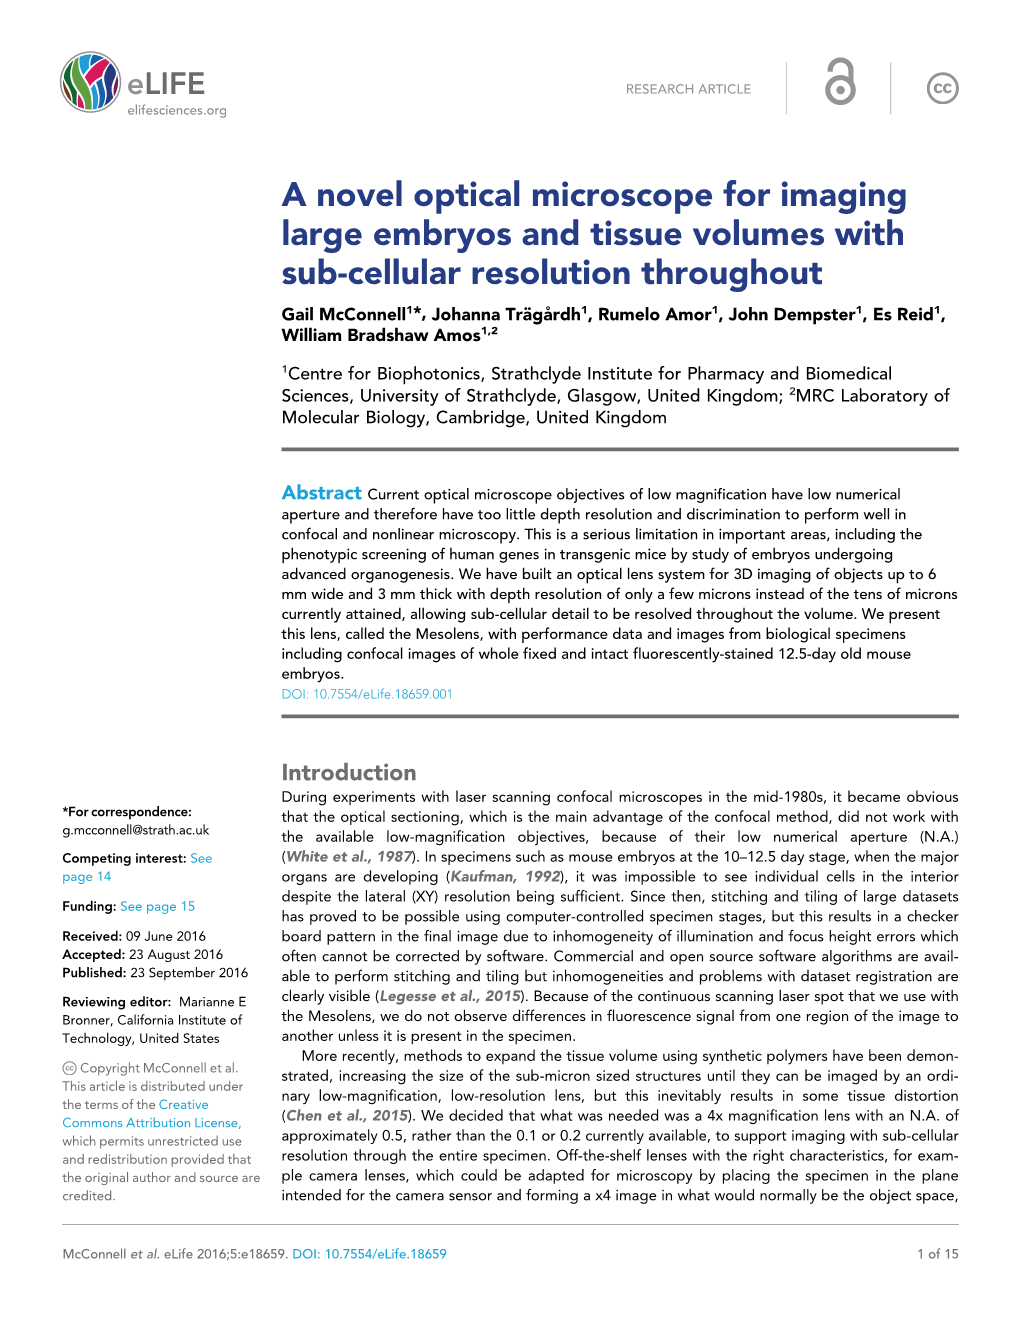 A Novel Optical Microscope for Imaging Large Embryos And